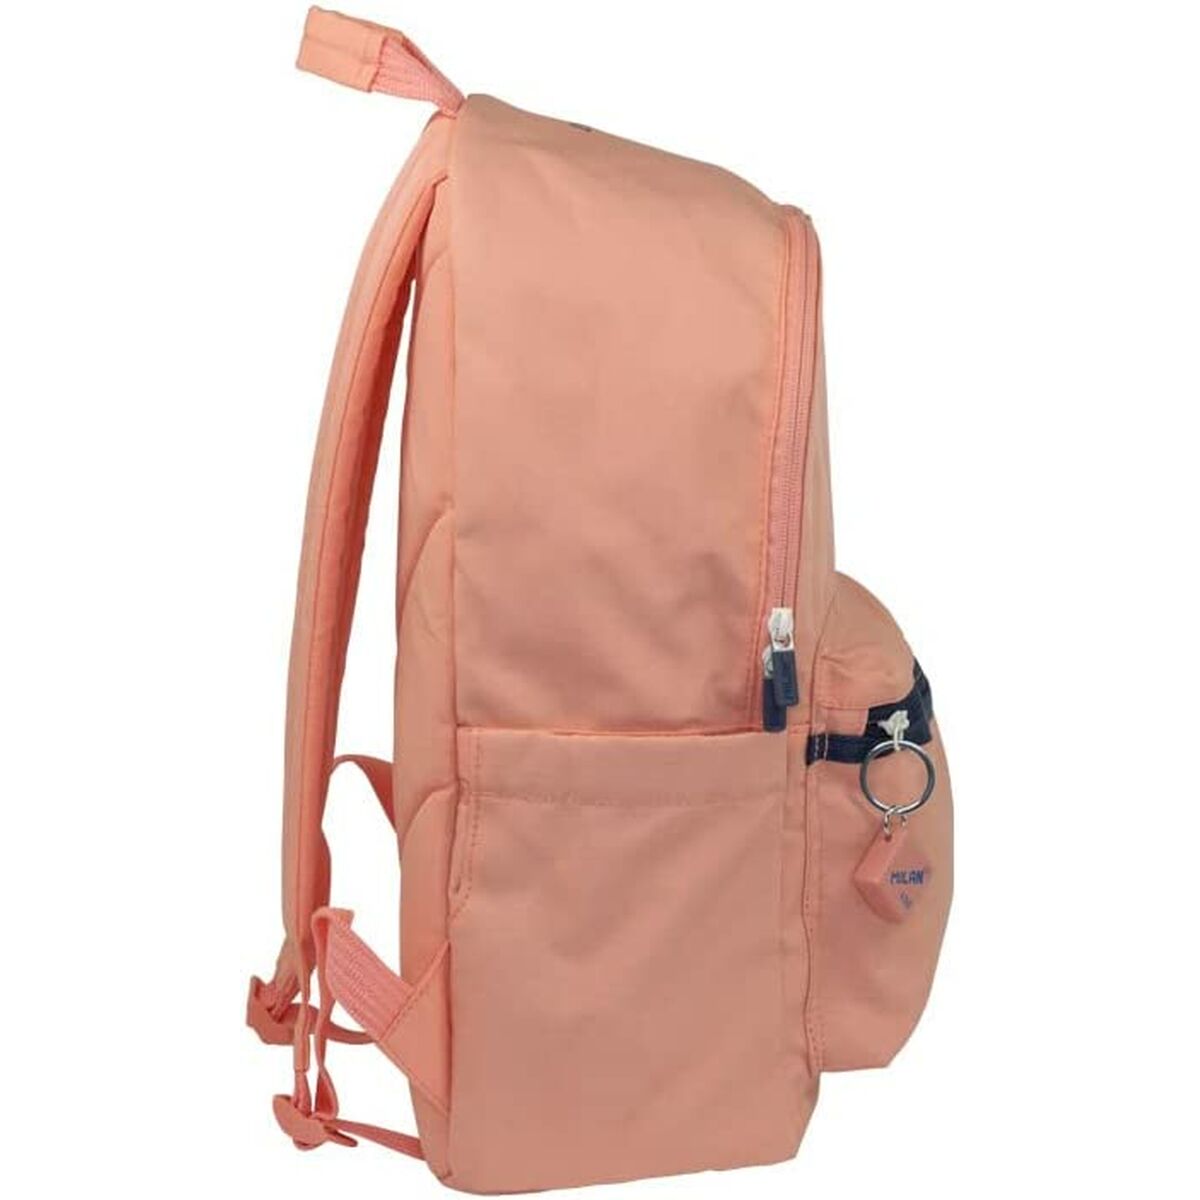 Casual Backpack Milan Pink (41 x 30 x 18 cm)